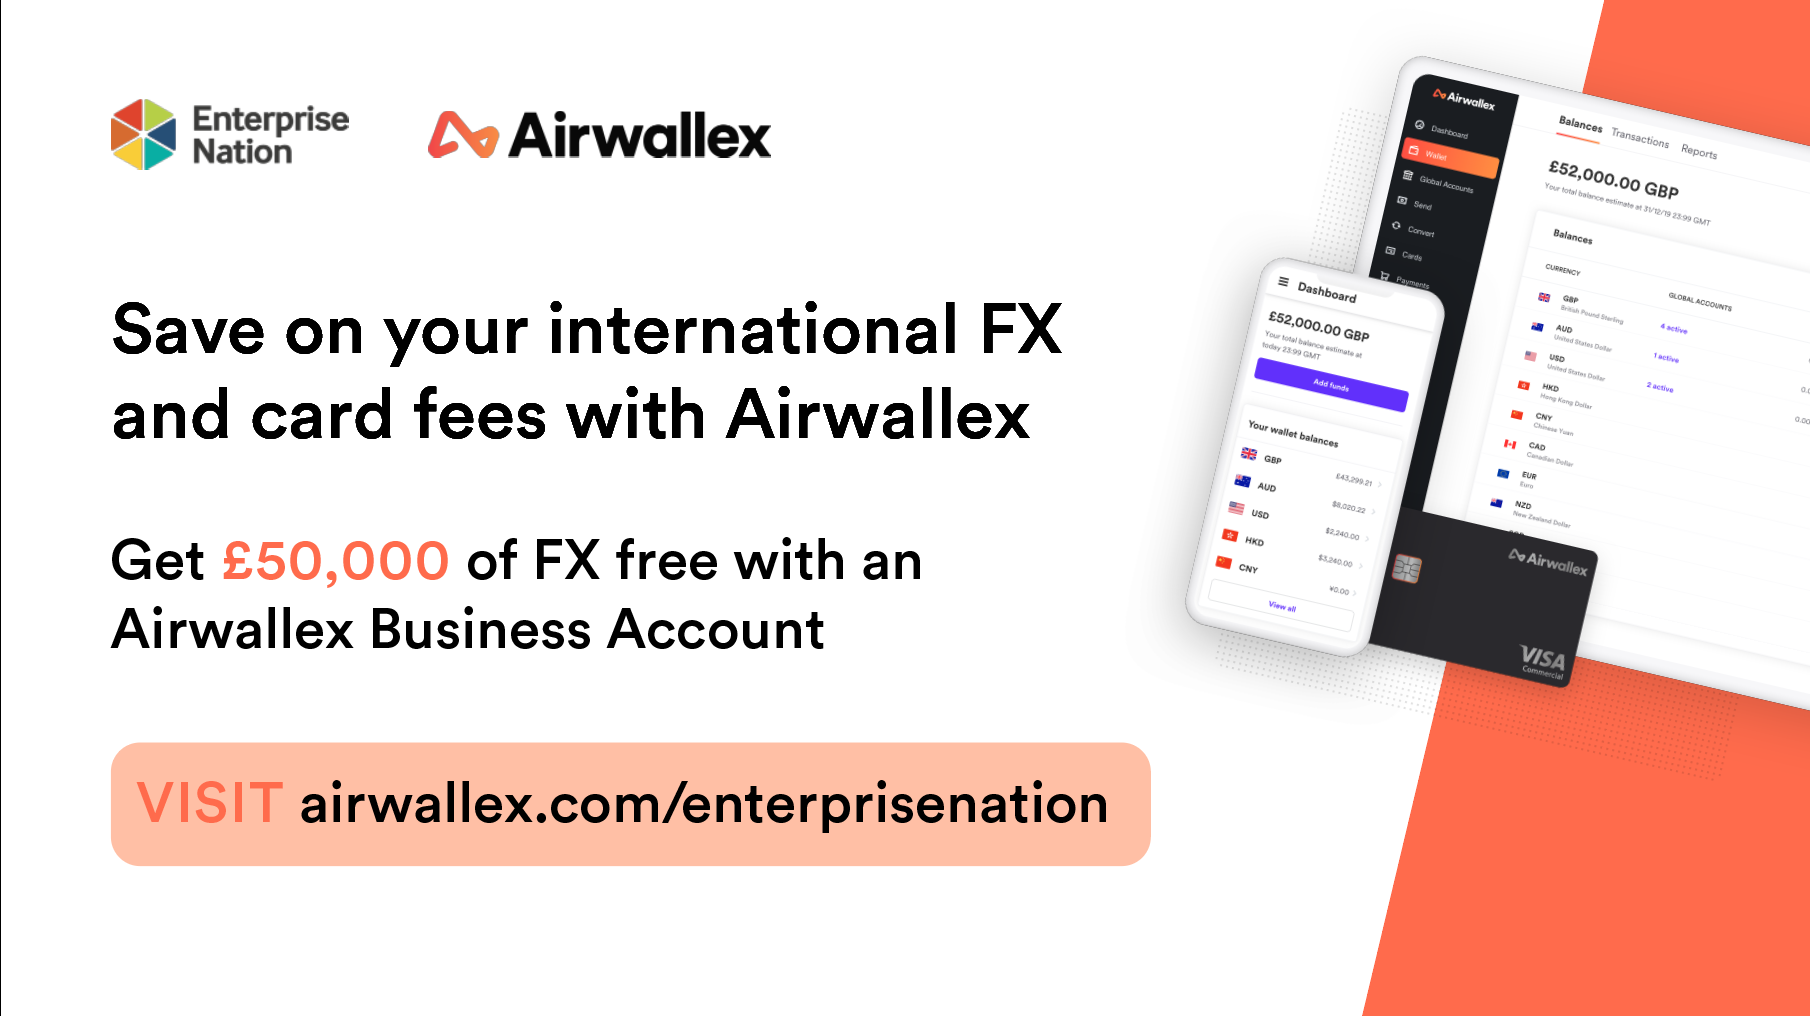 Airwallex - £50,000 free FX for new customers